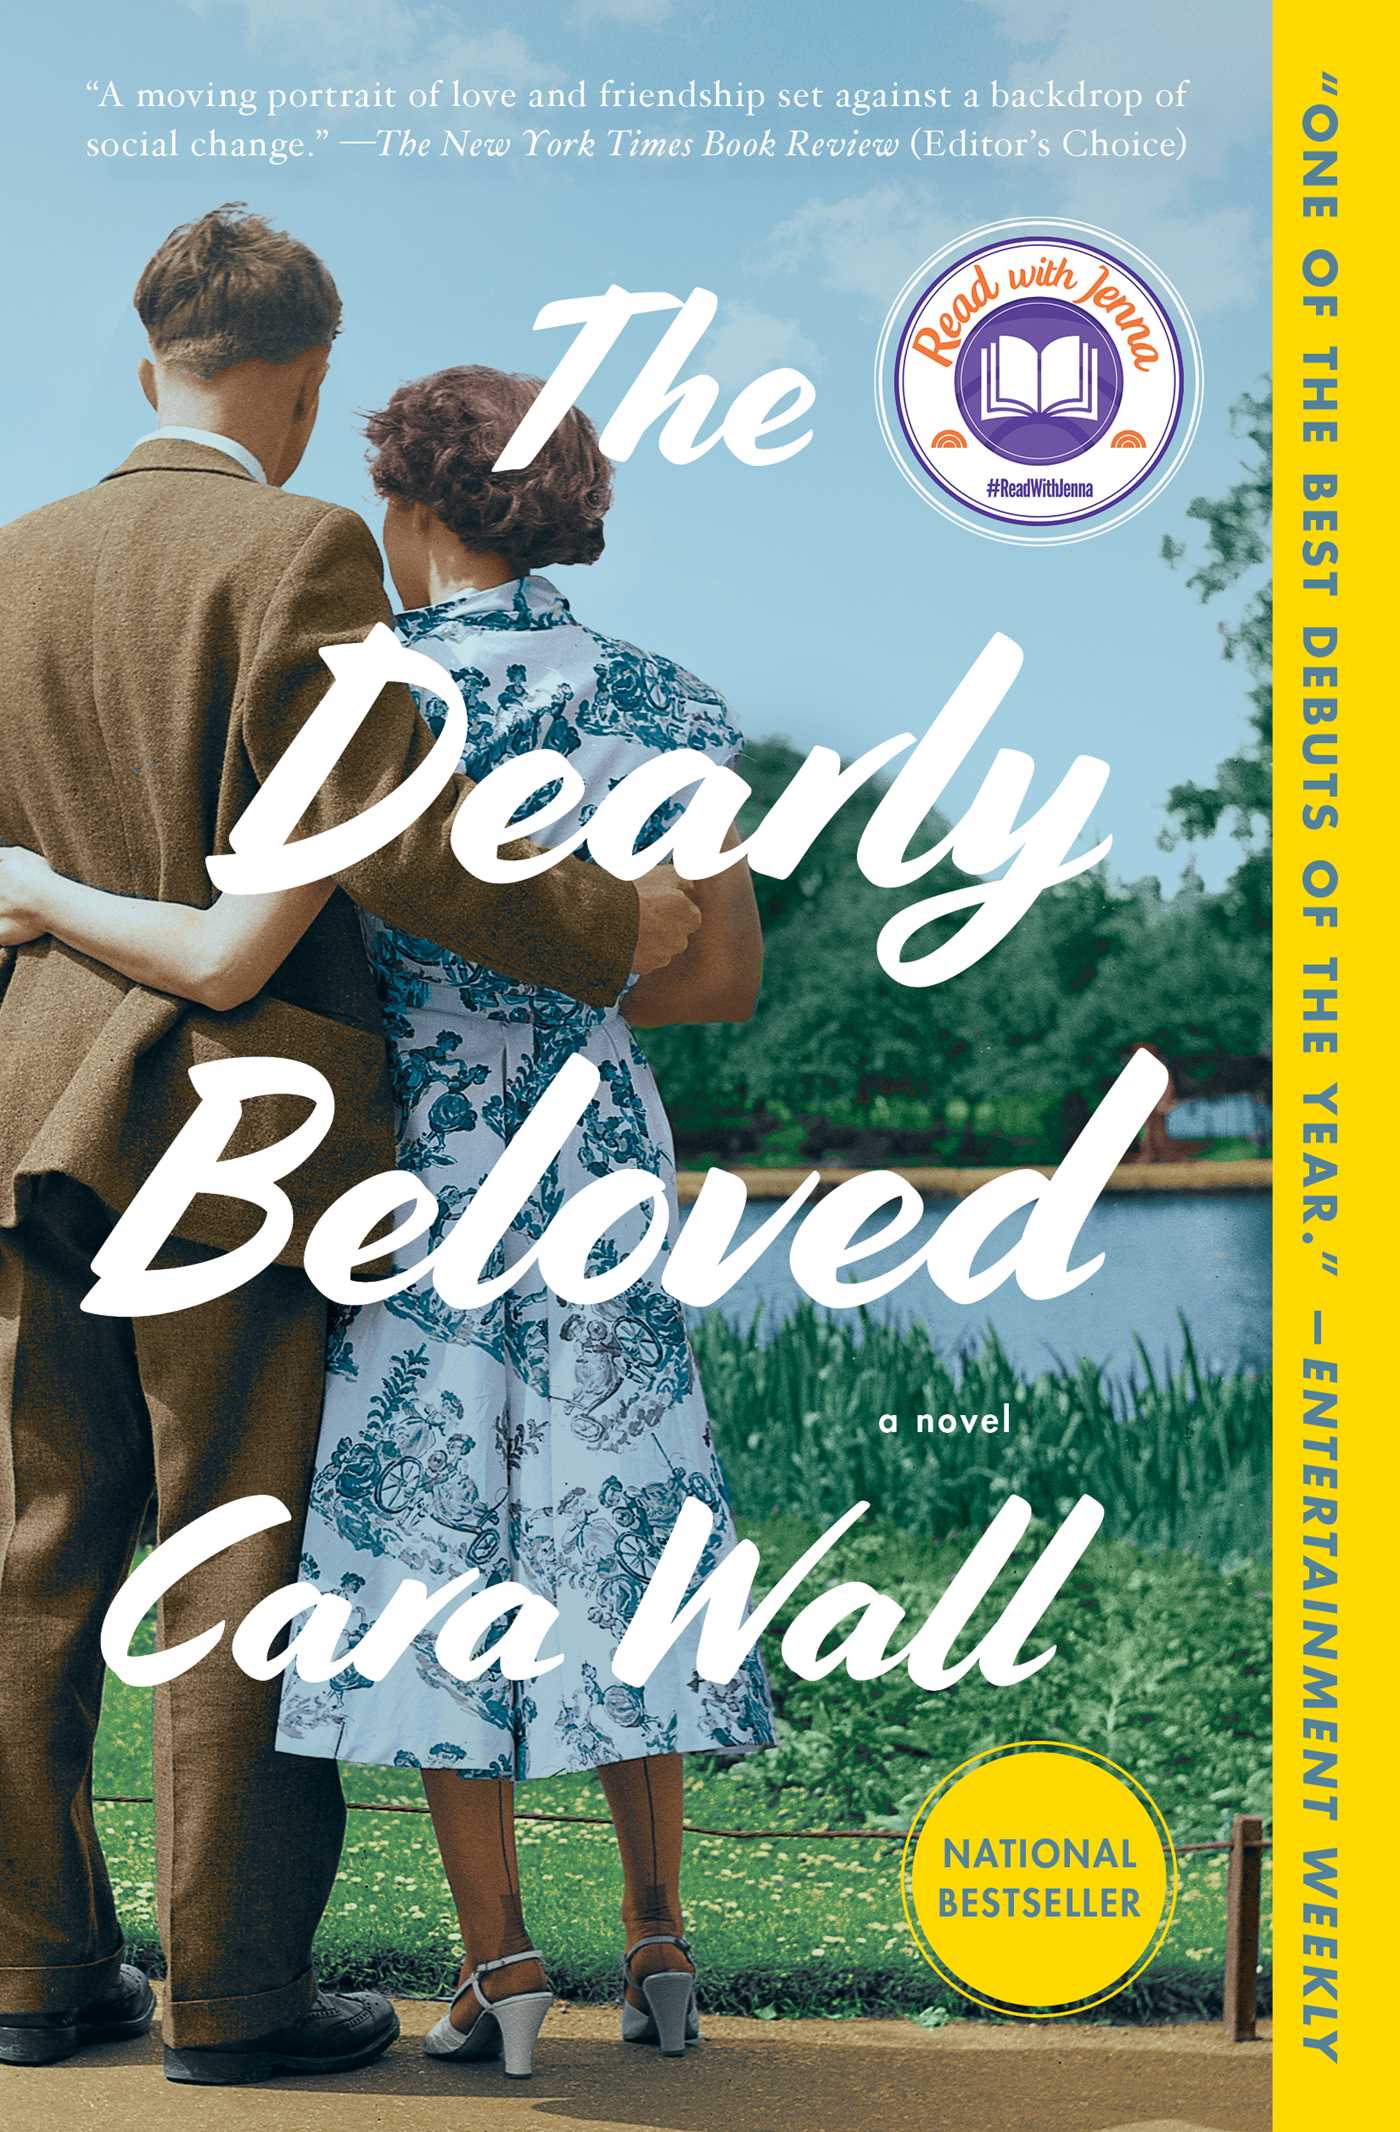 [EPUB] The Dearly Beloved by Cara Wall